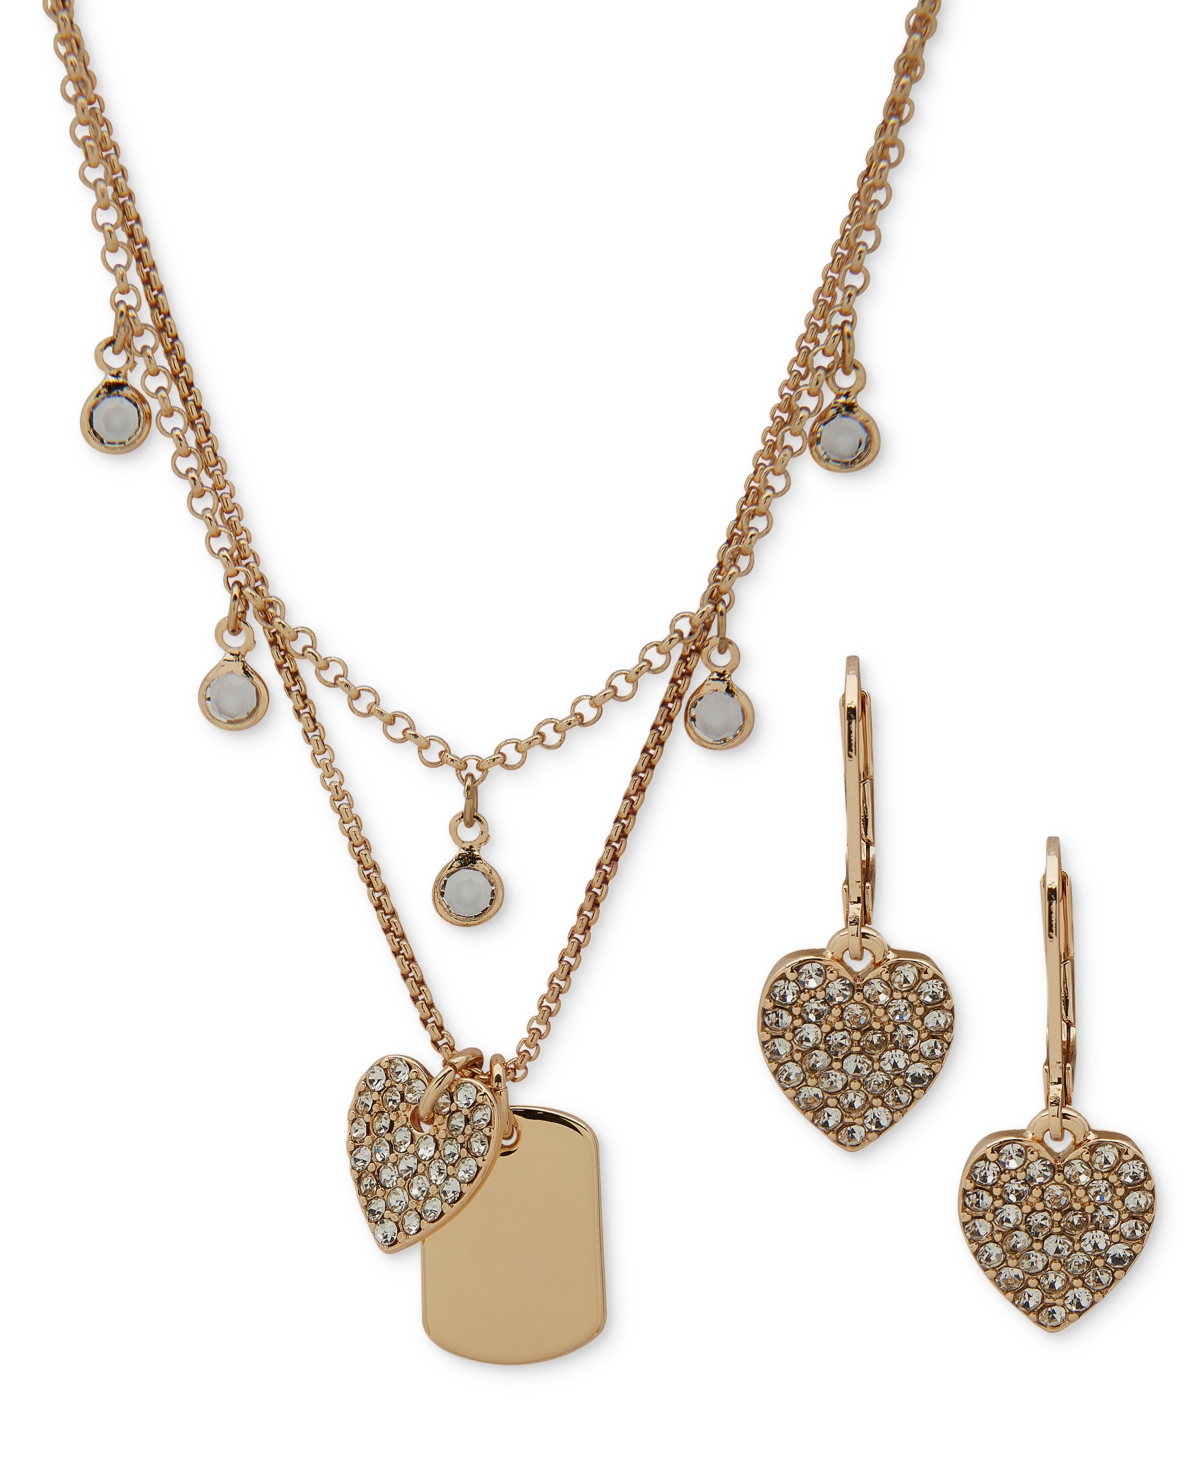 Shop Anne Klein Gold-tone Crystal Heart Charm Drop Earrings & Two-row Necklace Set, 16" + 3" Extender